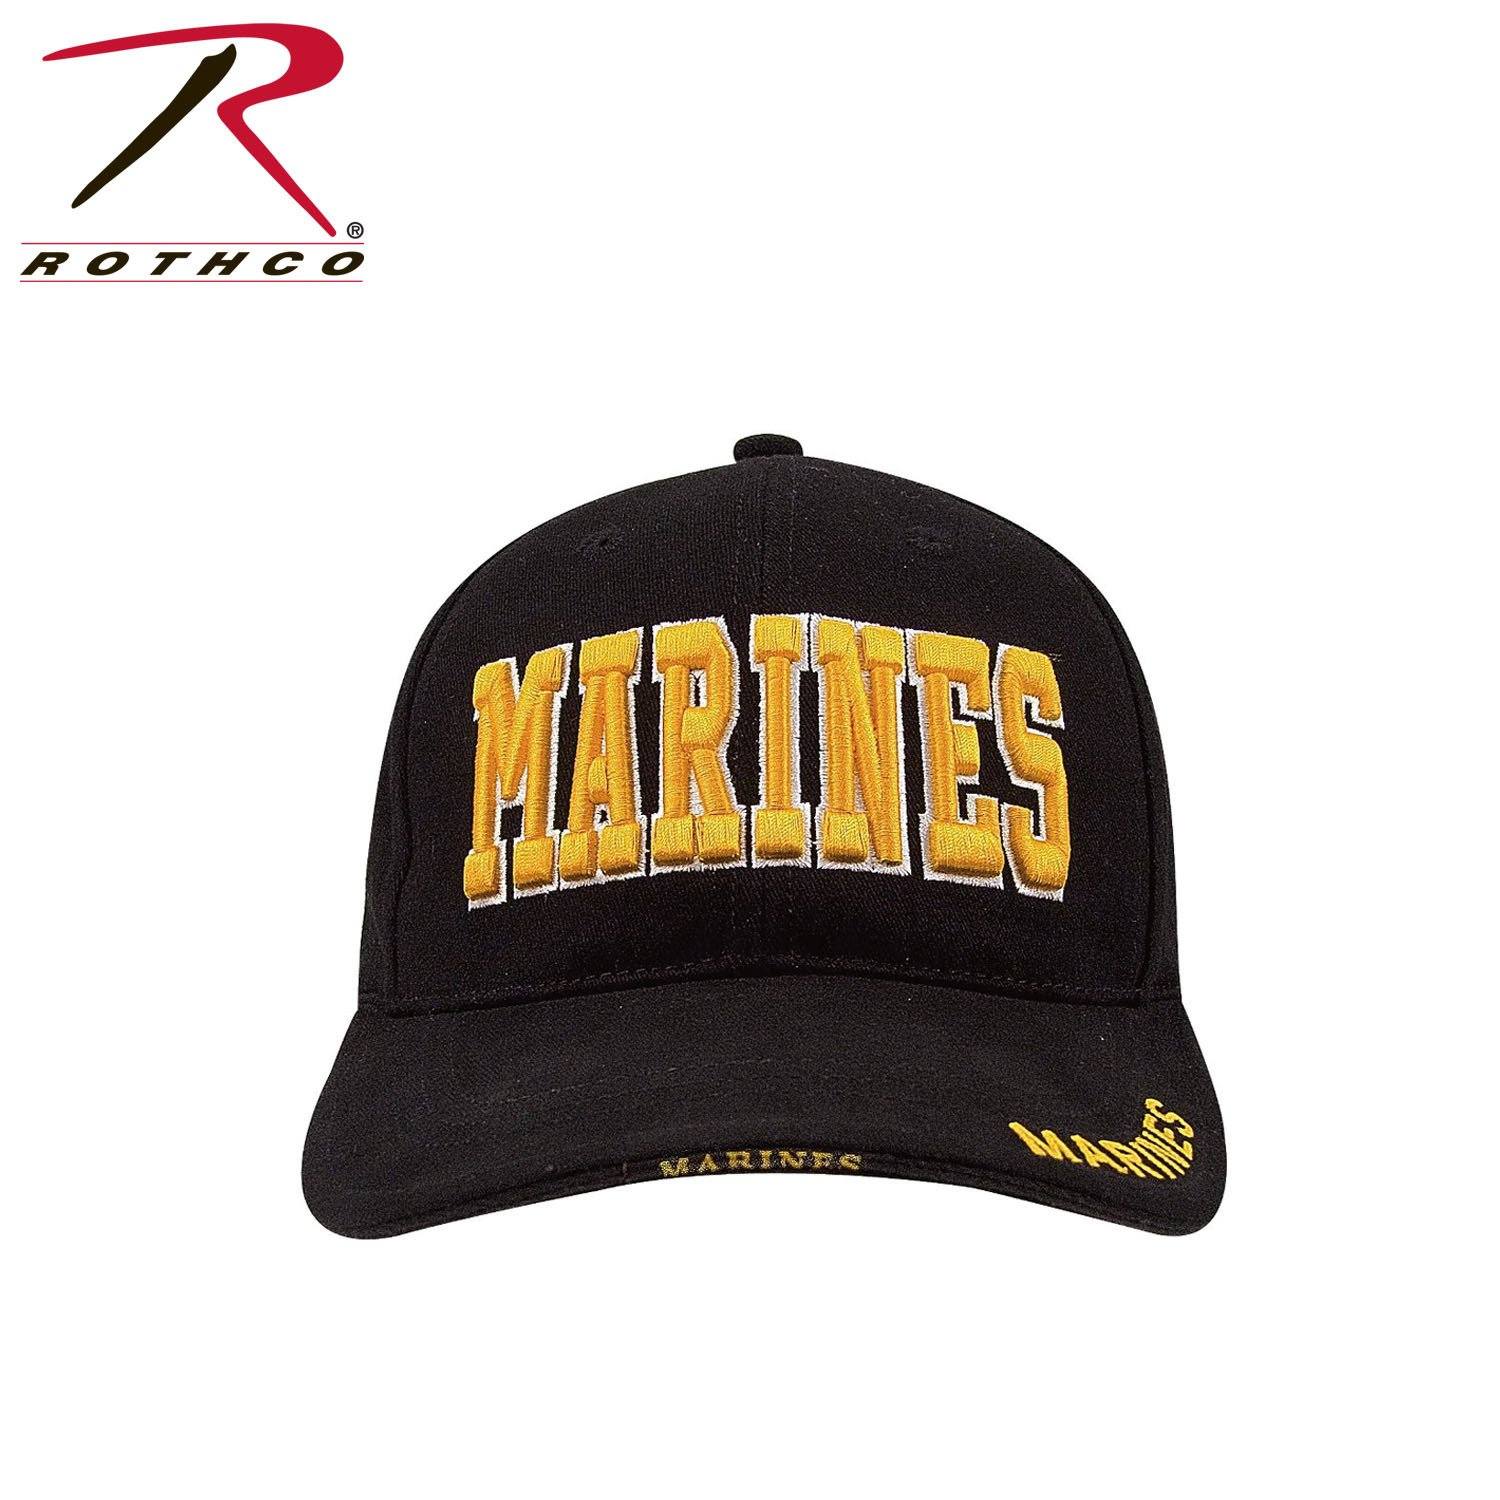 Deluxe Marines Gold & Black Hat - Marine Corps Direct